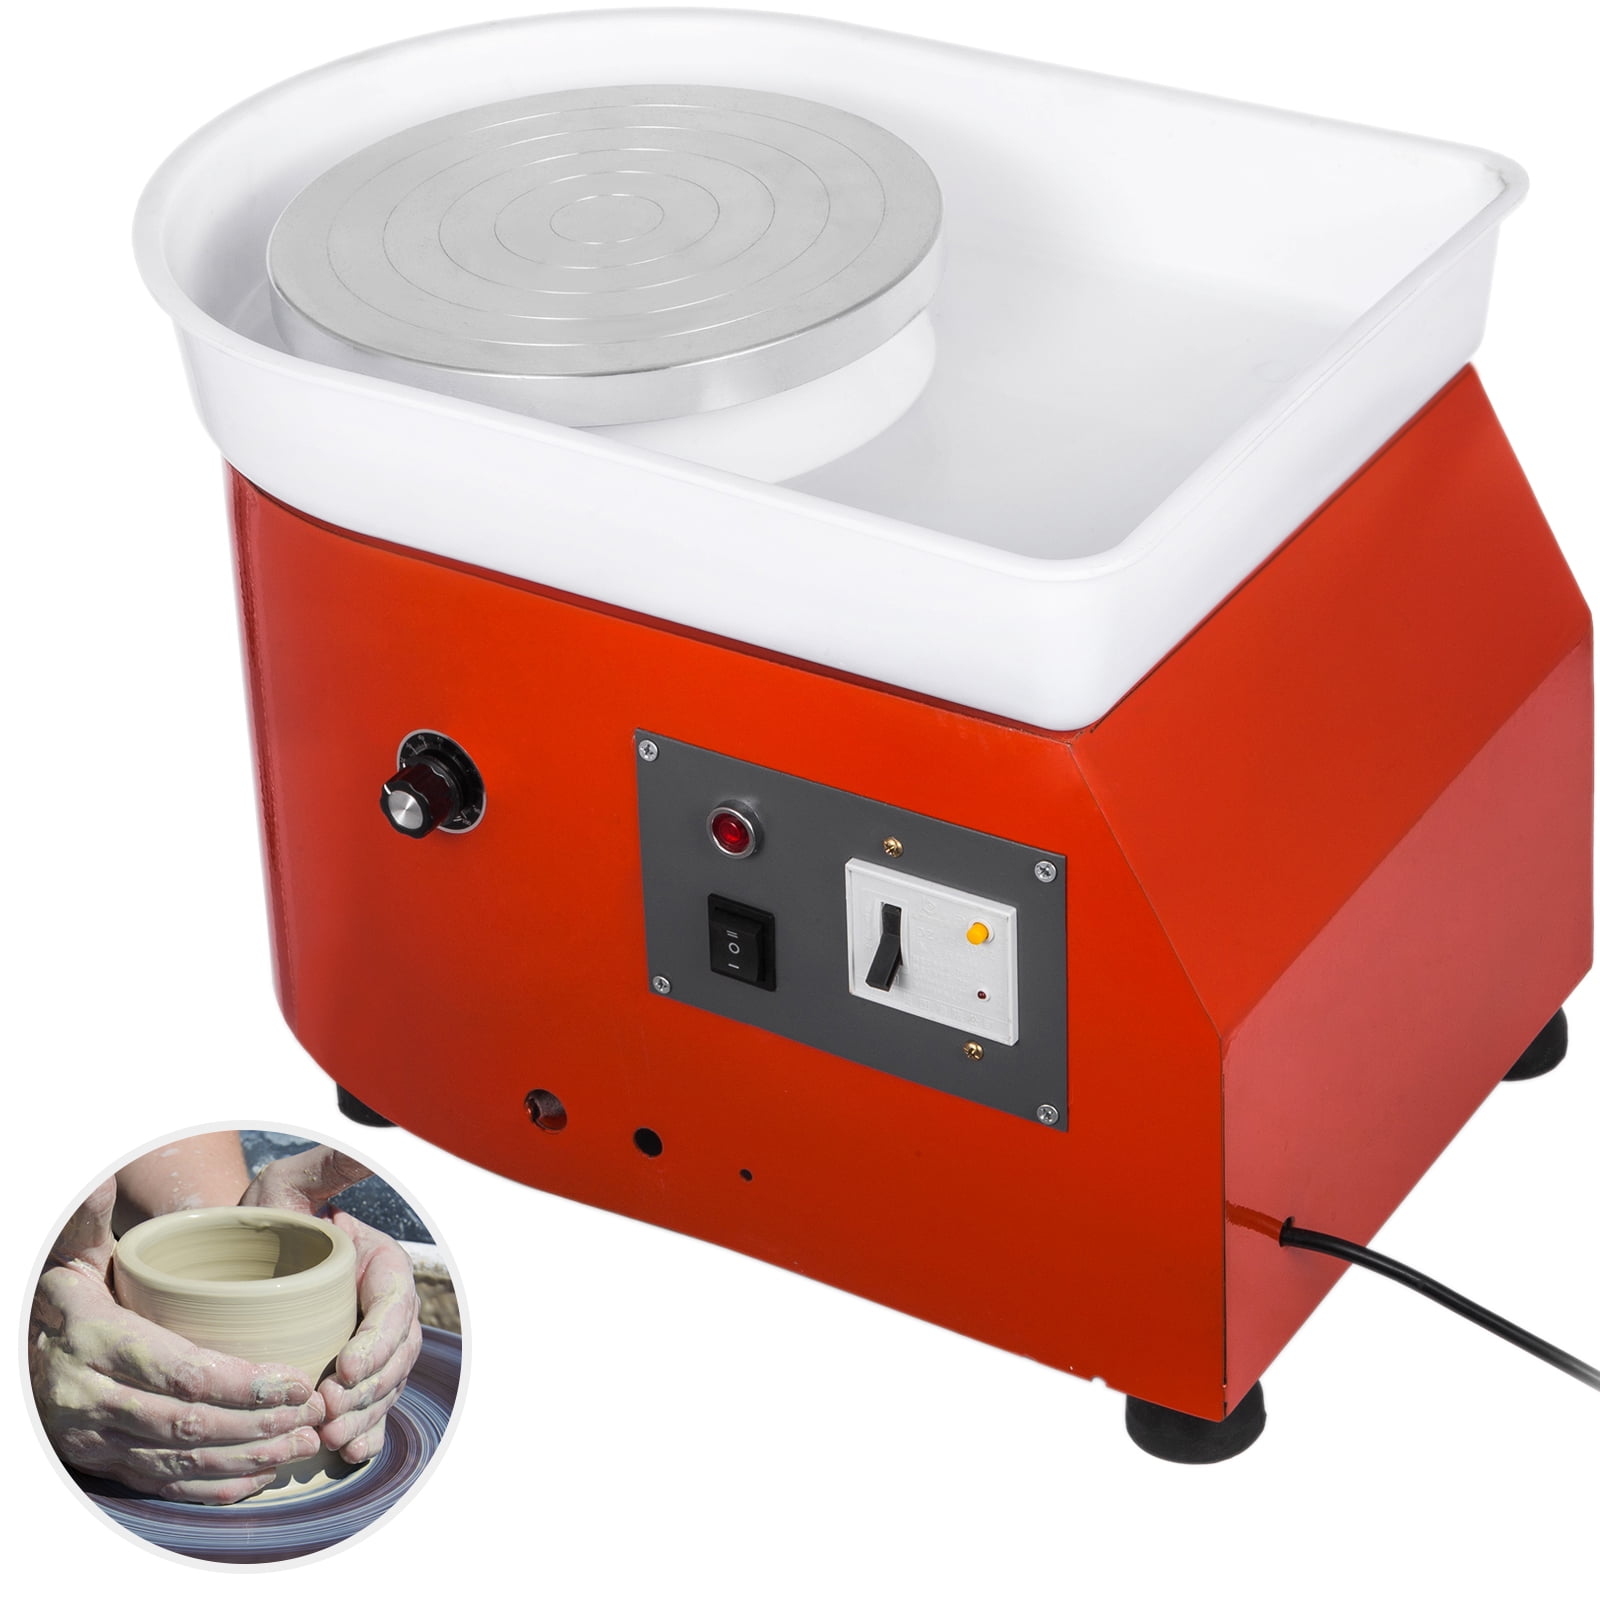 Red Dyna-Living Upgraded Mini Pottery Wheel Forming Machine with Tray for Children/Kids/Beginners/Adults Pottery Wheel Ceramic Pottery Wheel for DIY Ceramic Clay Work & Art Crafts 